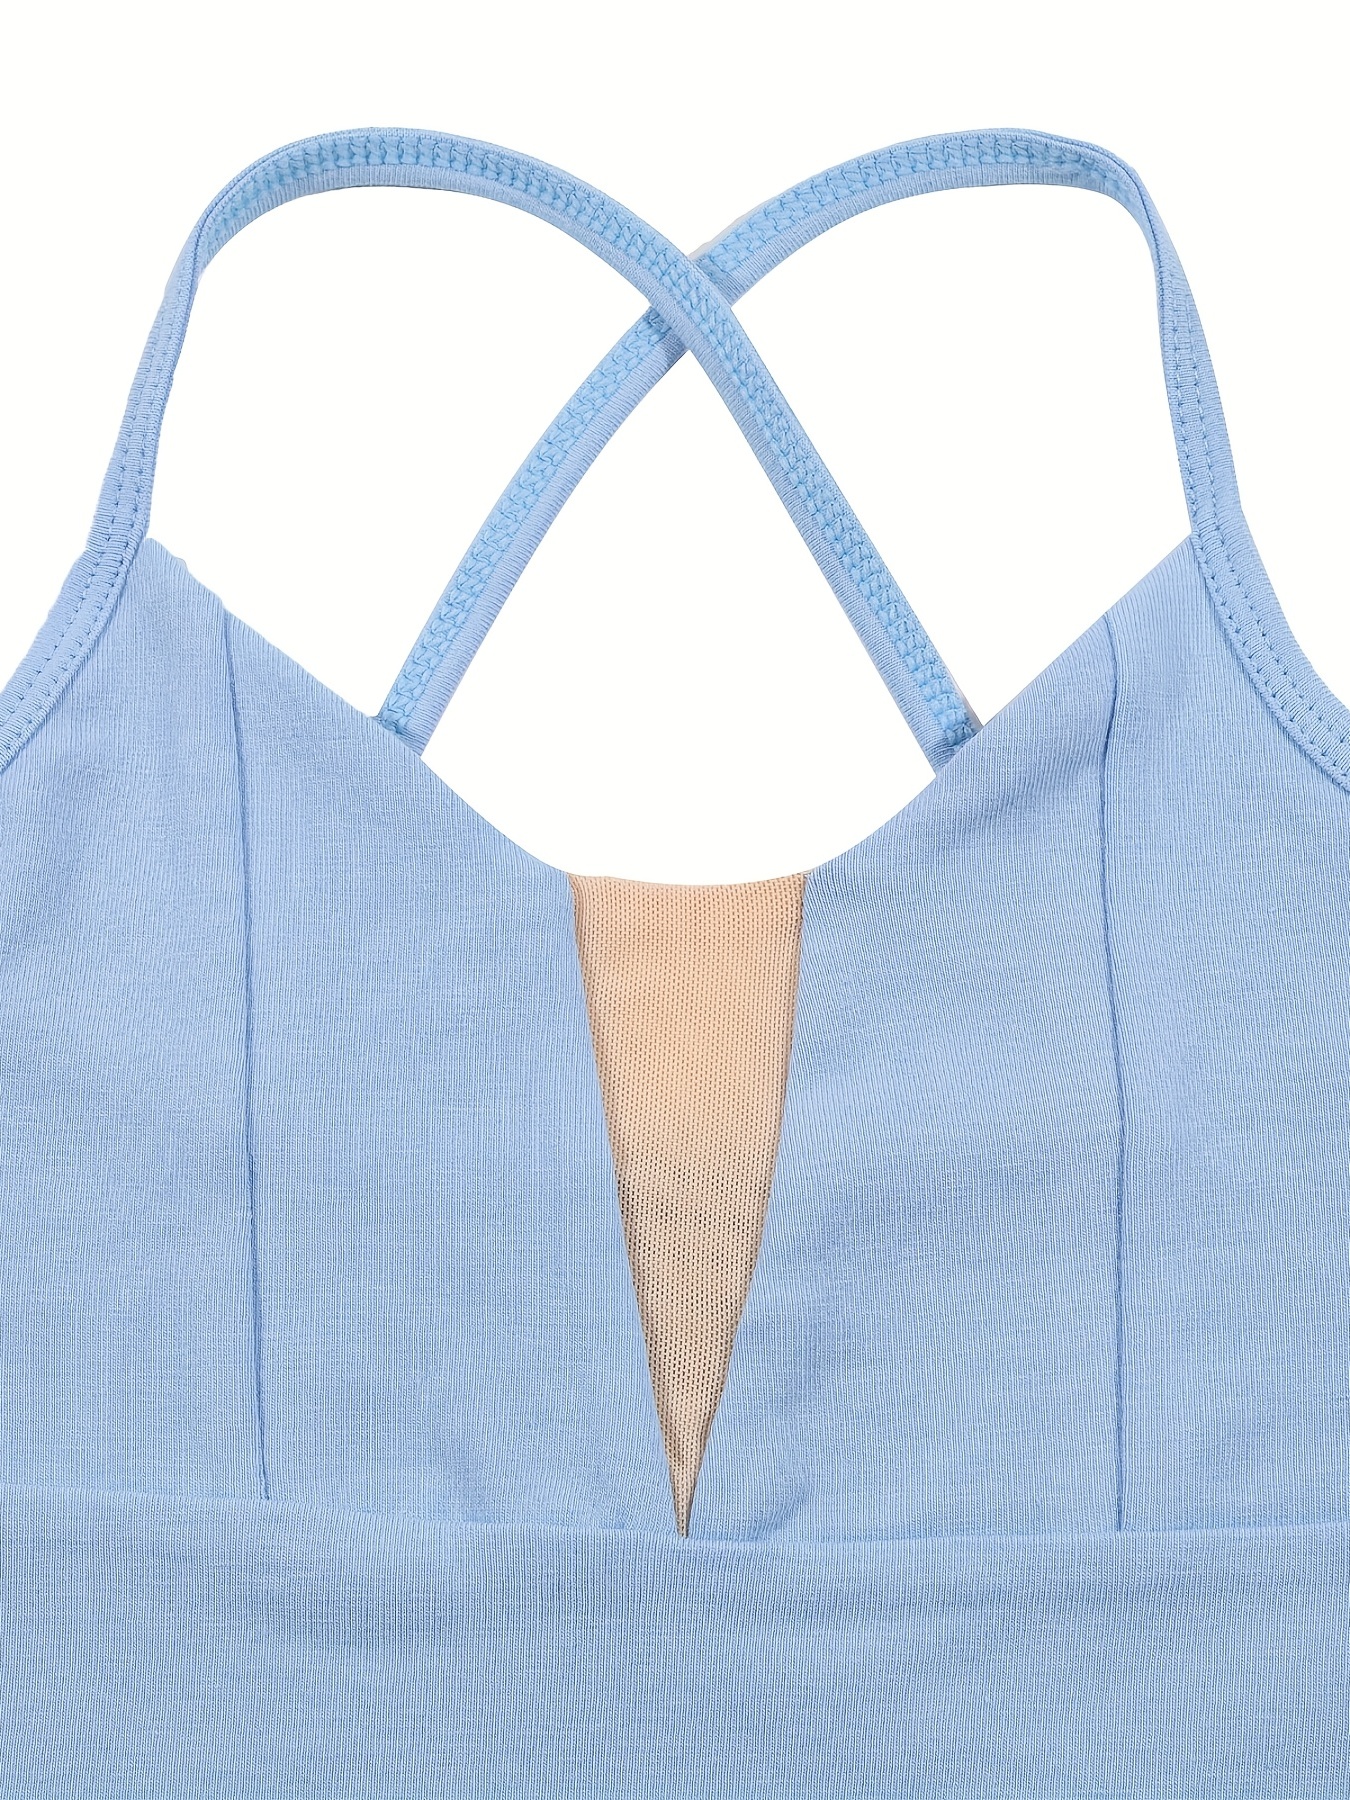 Baby Blue Ribbed Athletic Dress